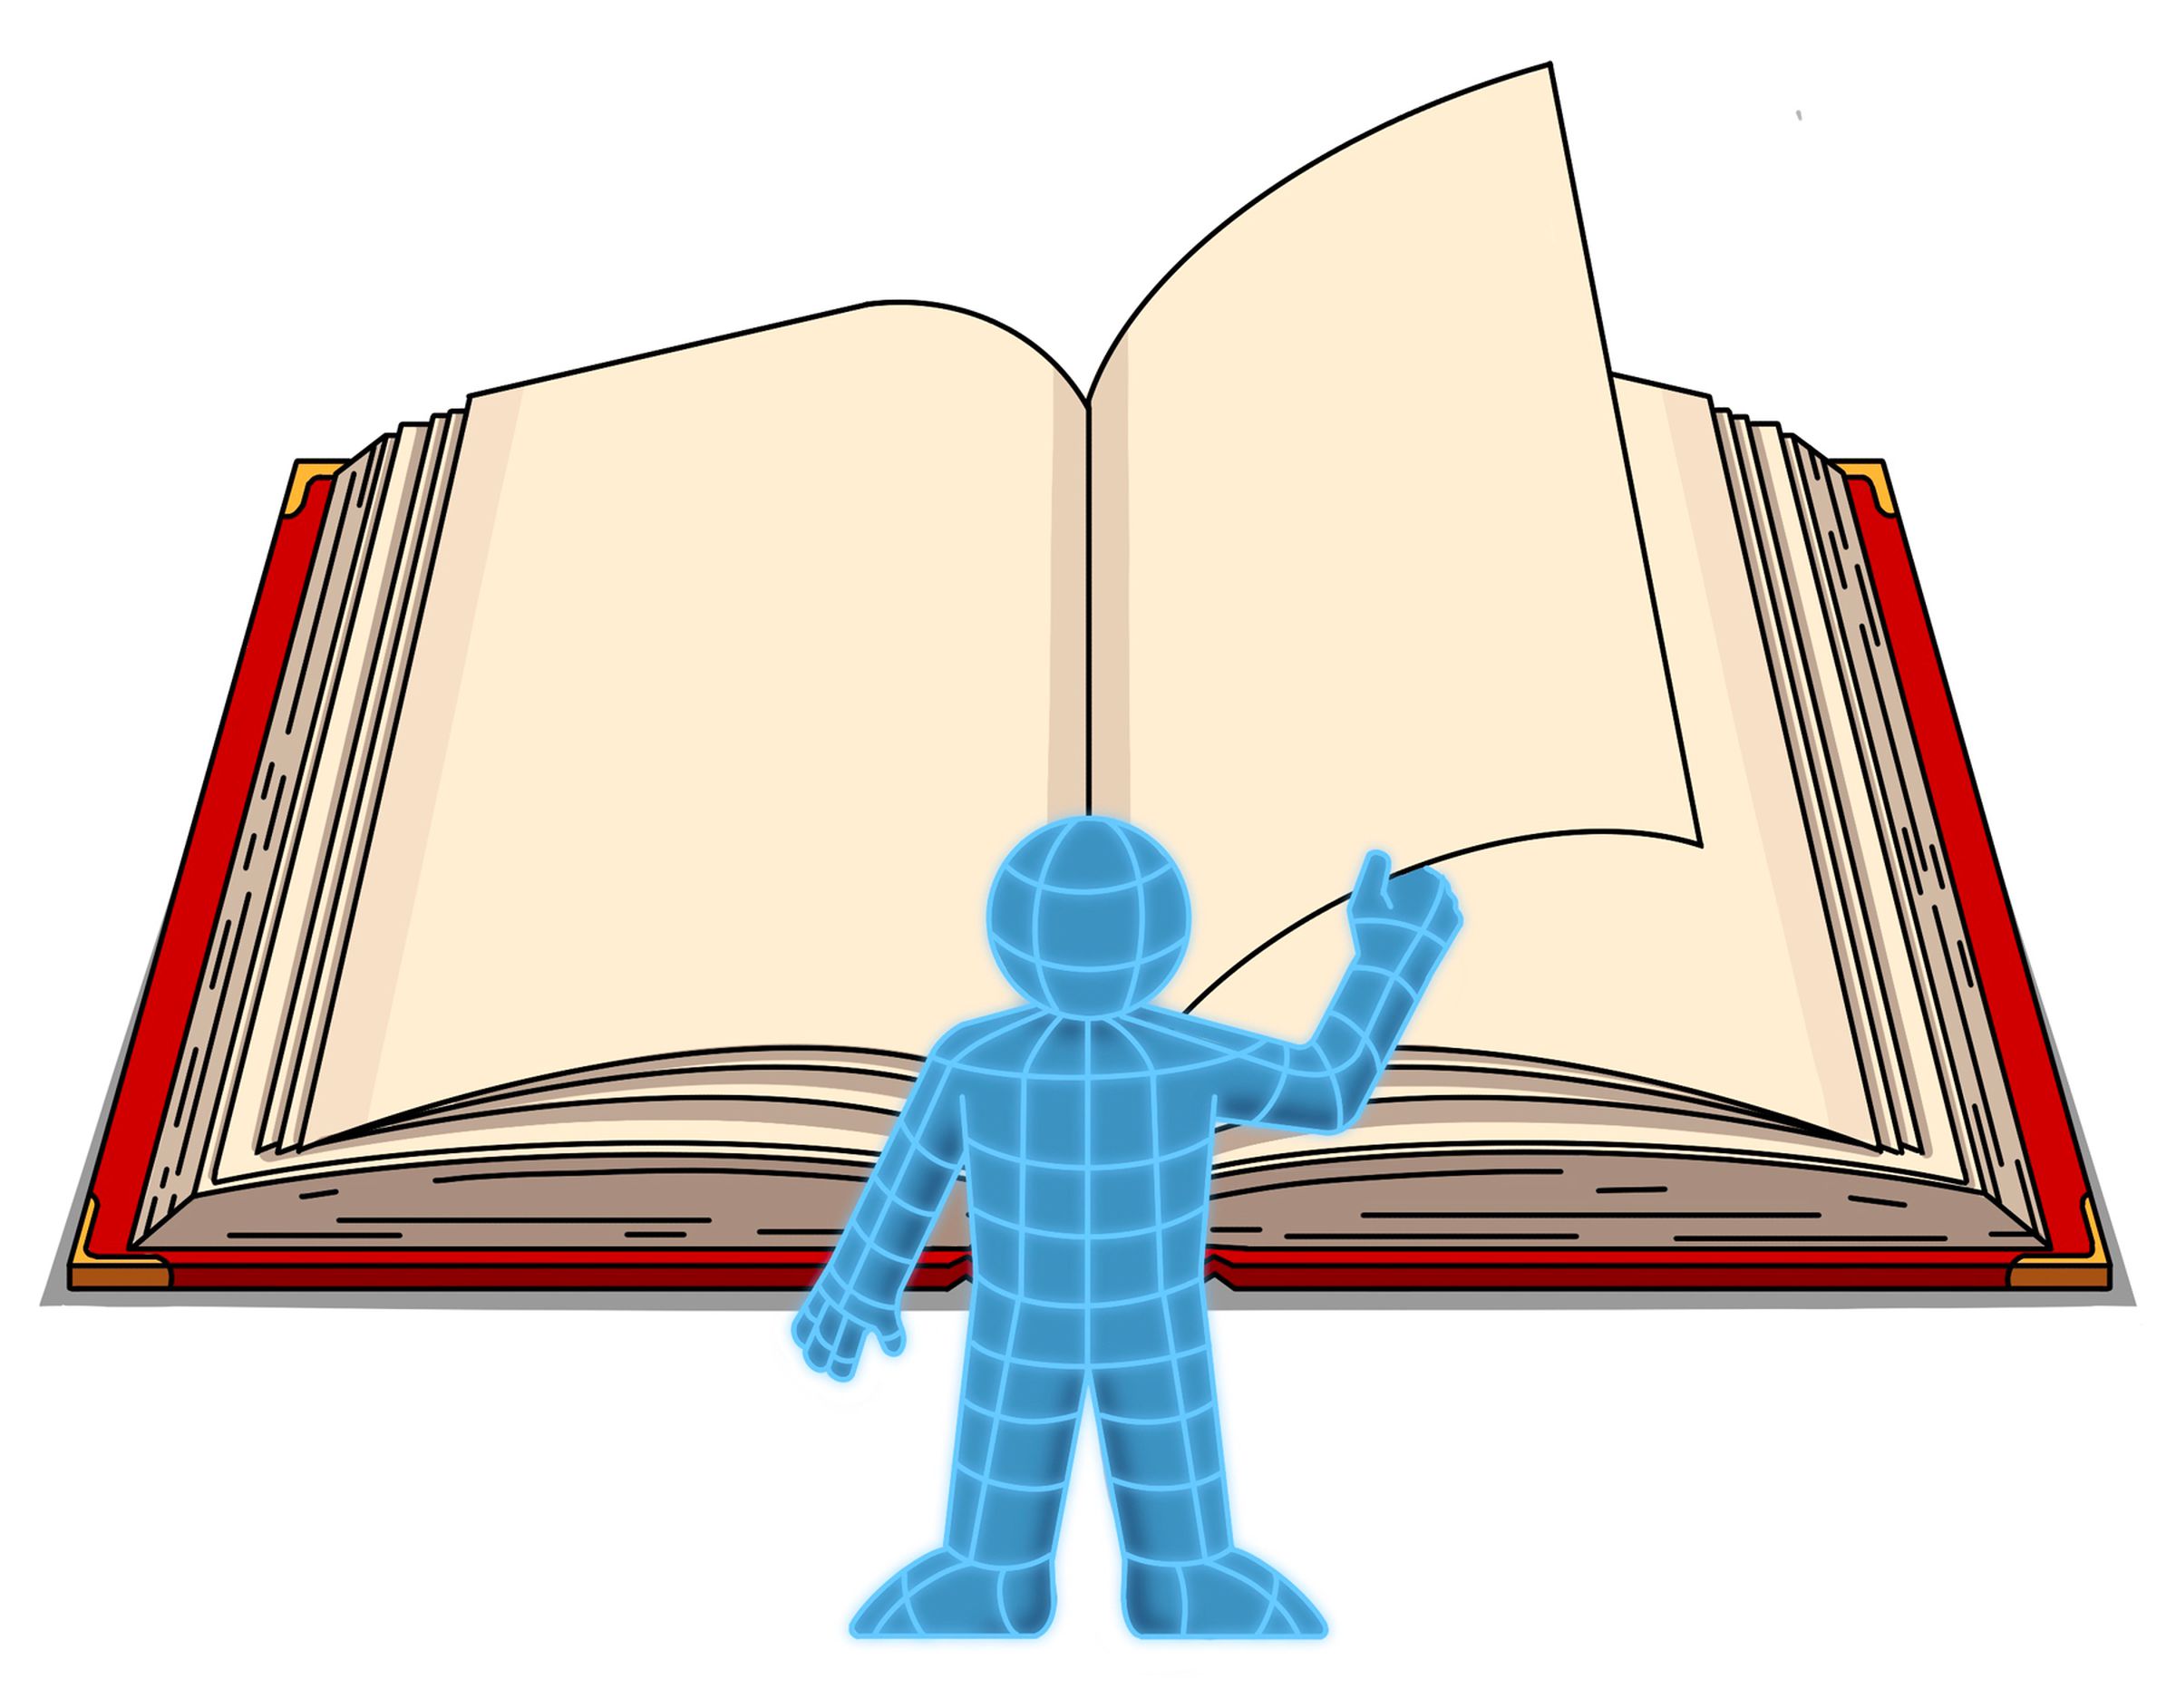 Illustration of wireframe figure flipping through the pages of a book.